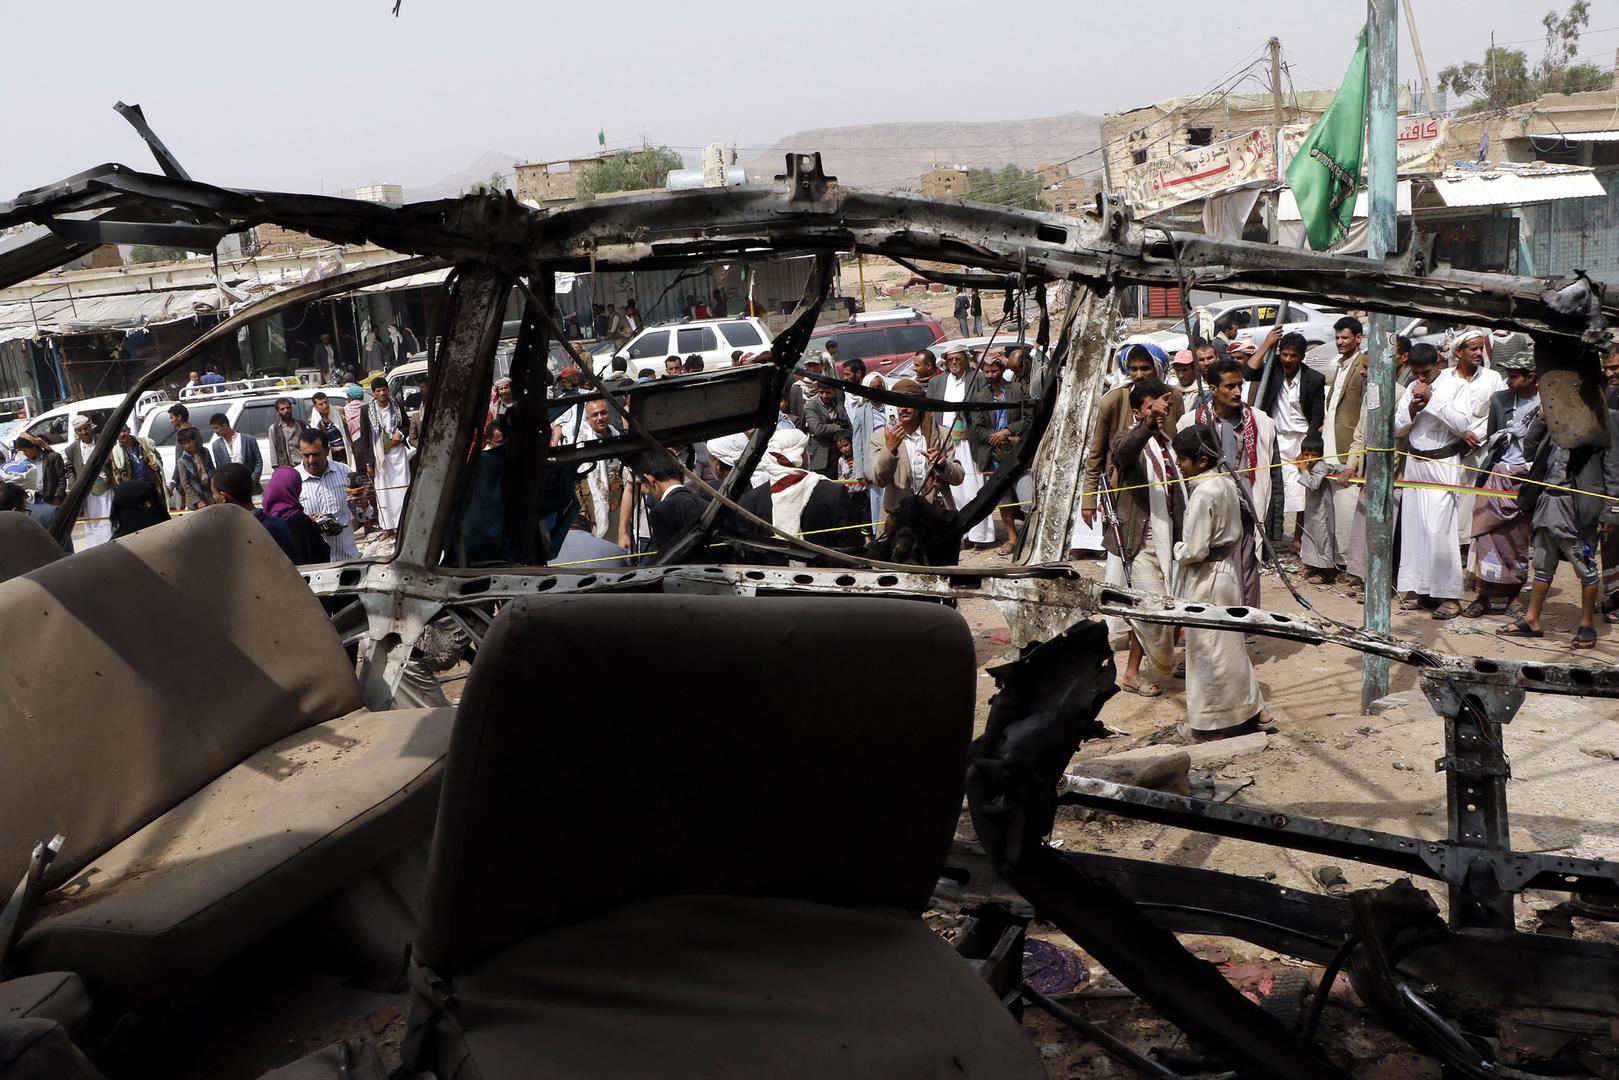 People are seen near a bus destroyed by an airstrike that killed dozens of children, in a photograph taken on August 12, 2018 in Saada, Yemen.